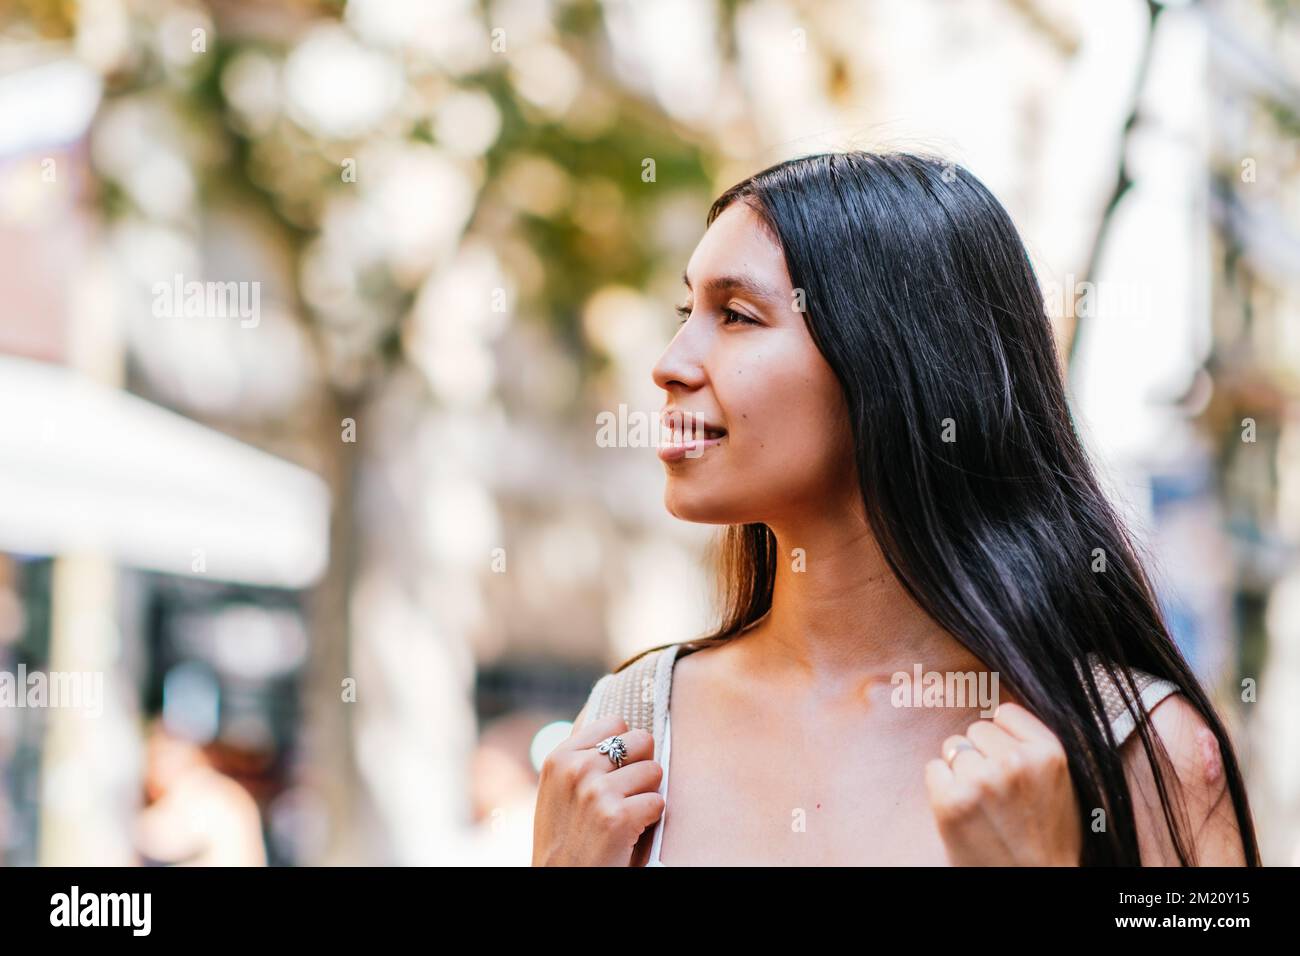 Positive Hispanic female tourist with long black hair looking away with smile on blurred background of sunlit street in Barcelona, Spain Stock Photo